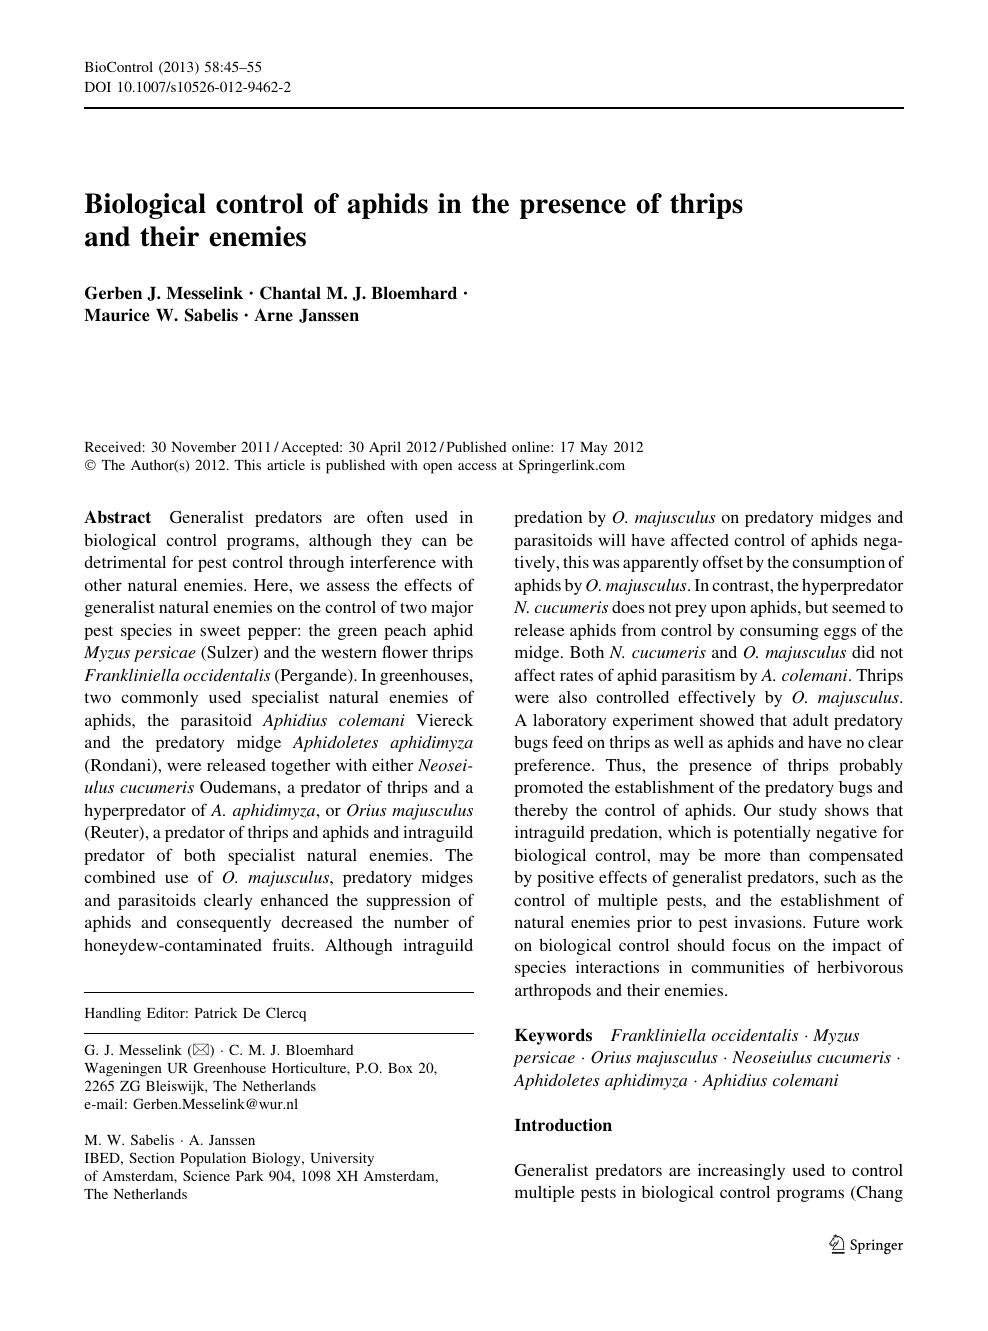 Thrips Control and Intraguild Predation